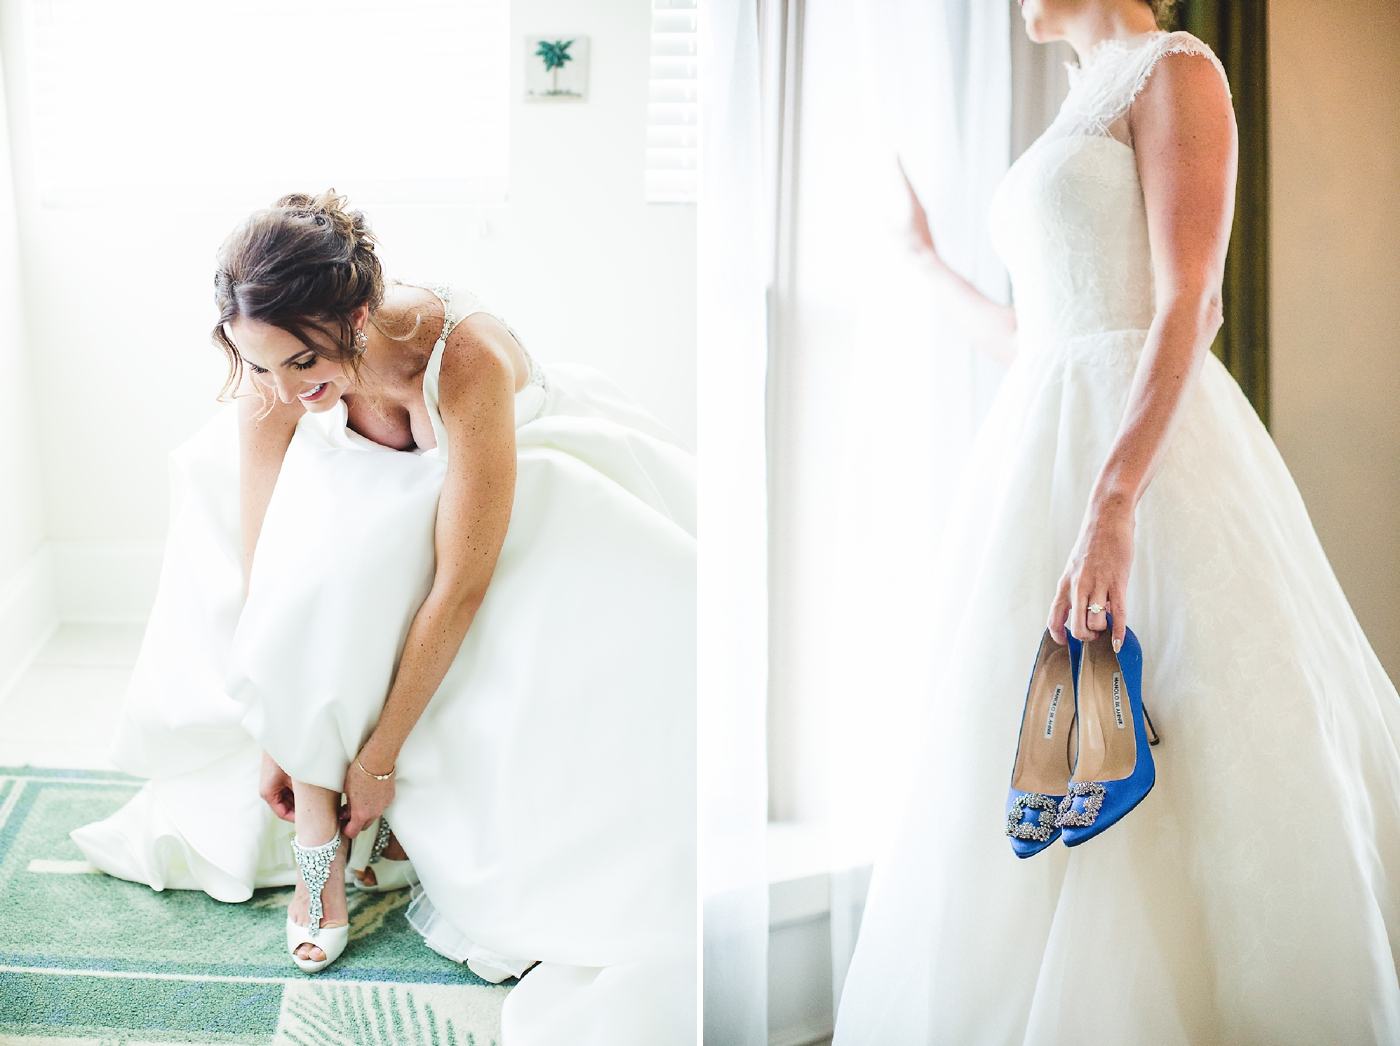 The importance of getting ready photography on your wedding day - Izzy And Co.